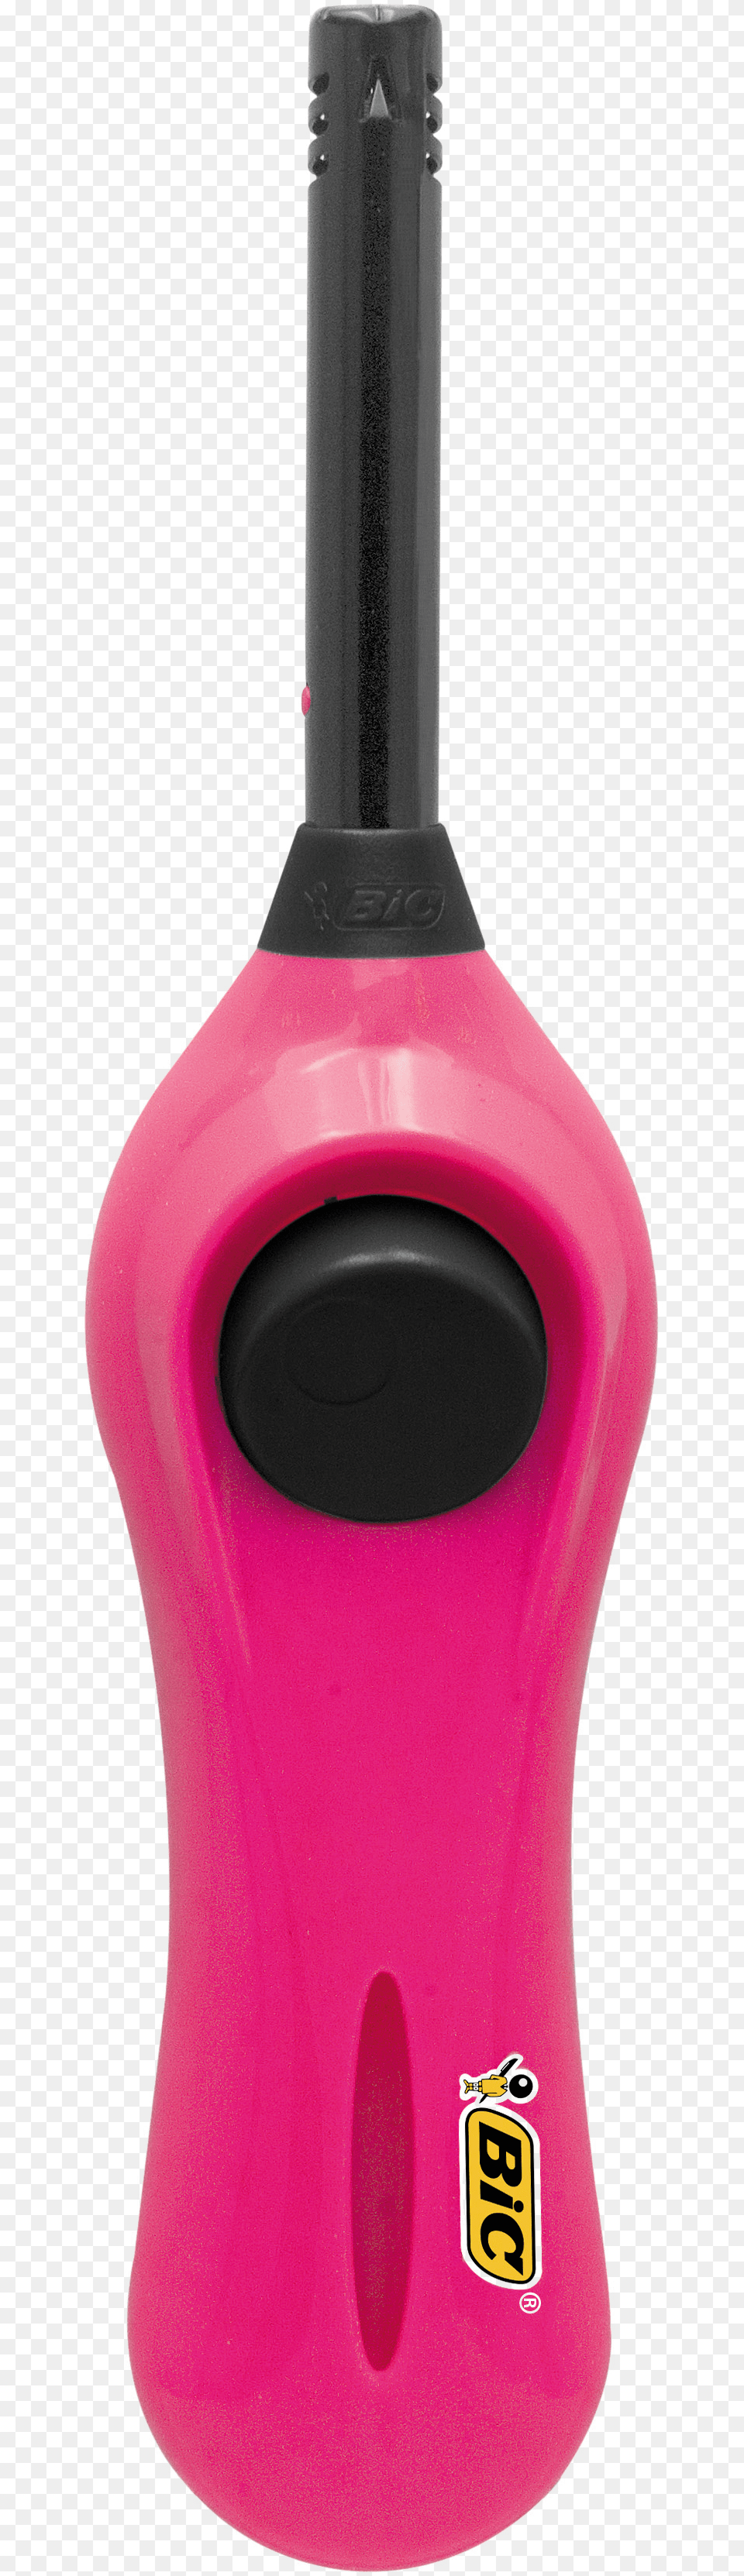 Mega Design Lighters Bic Bic, Electrical Device, Microphone Png Image